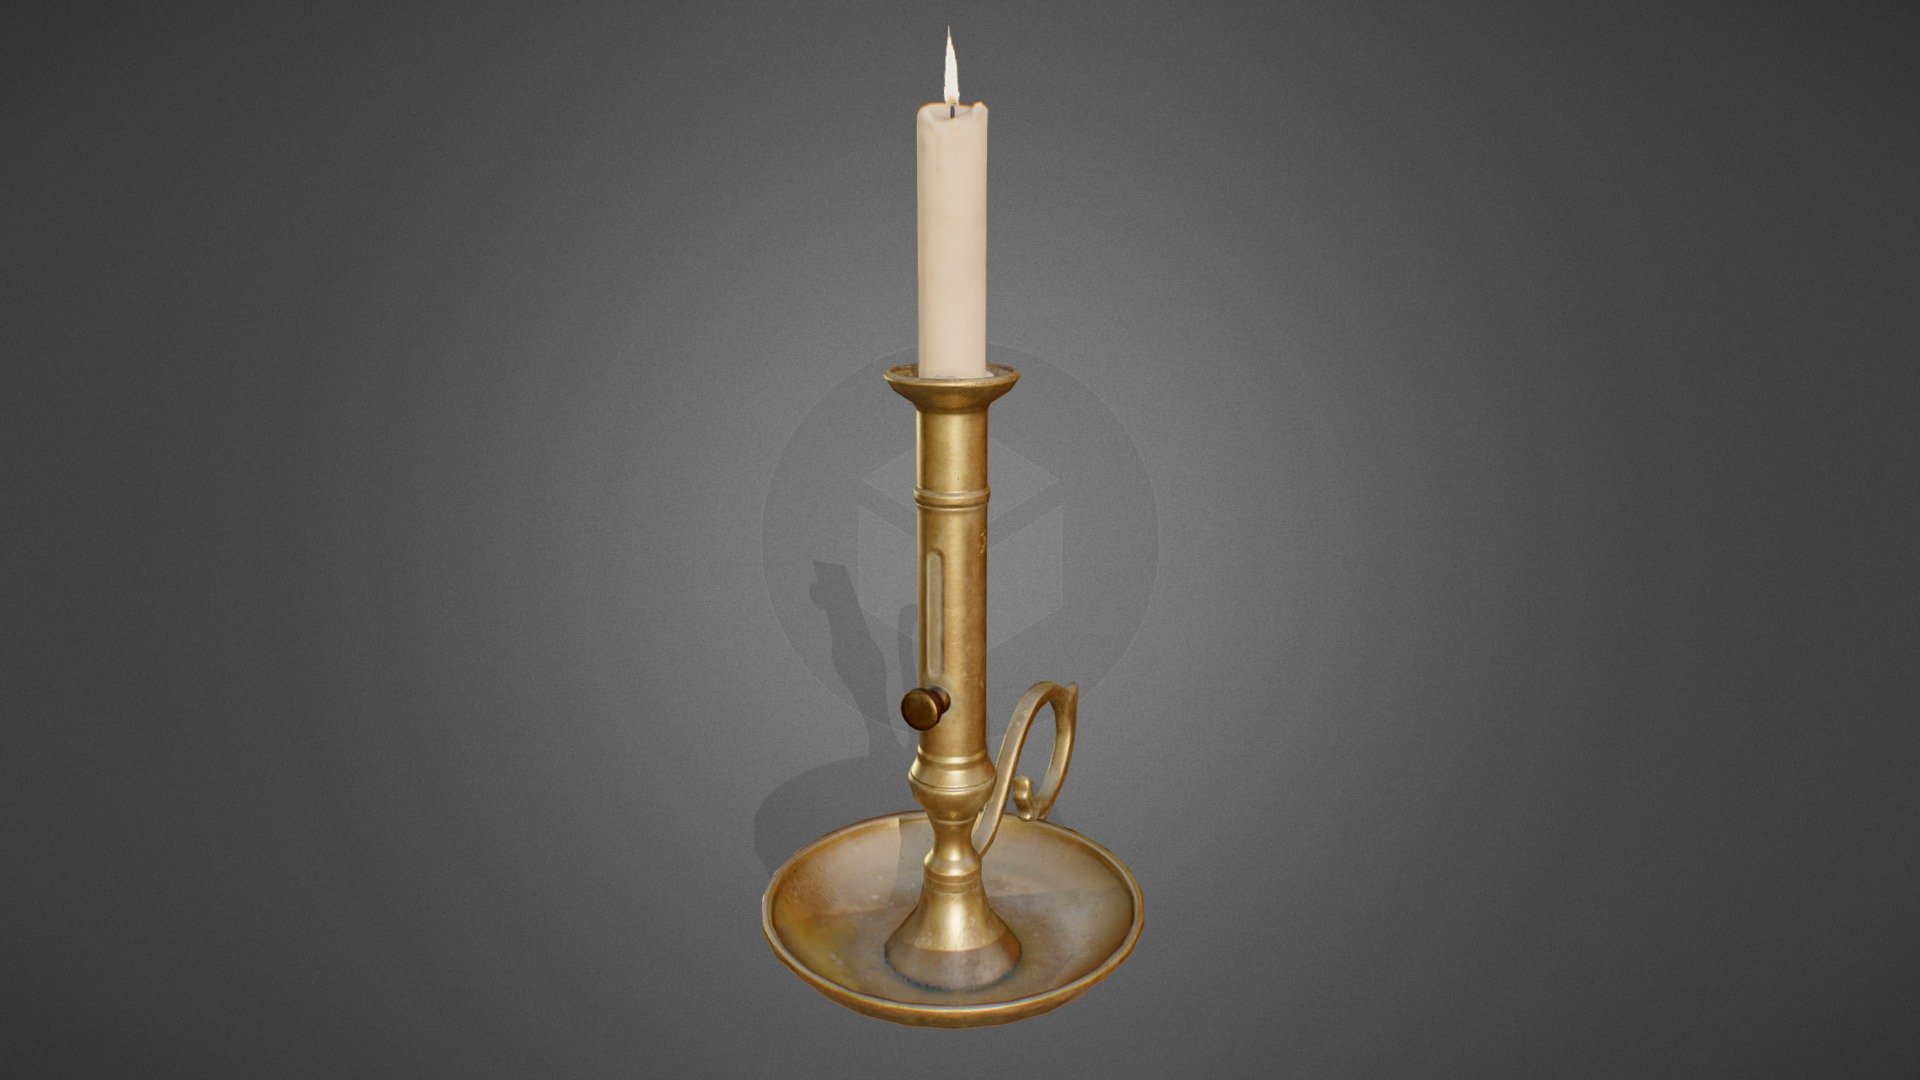 A game-ready antique candle holder. Modelled in Blender and textured in Substance Painter. Free to download.

This model is part of collection: Candle Holder and Chandelier Pack - Antique Candle Holder - Download Free 3D model by Matthew Collings (@mtcollings) 3d model